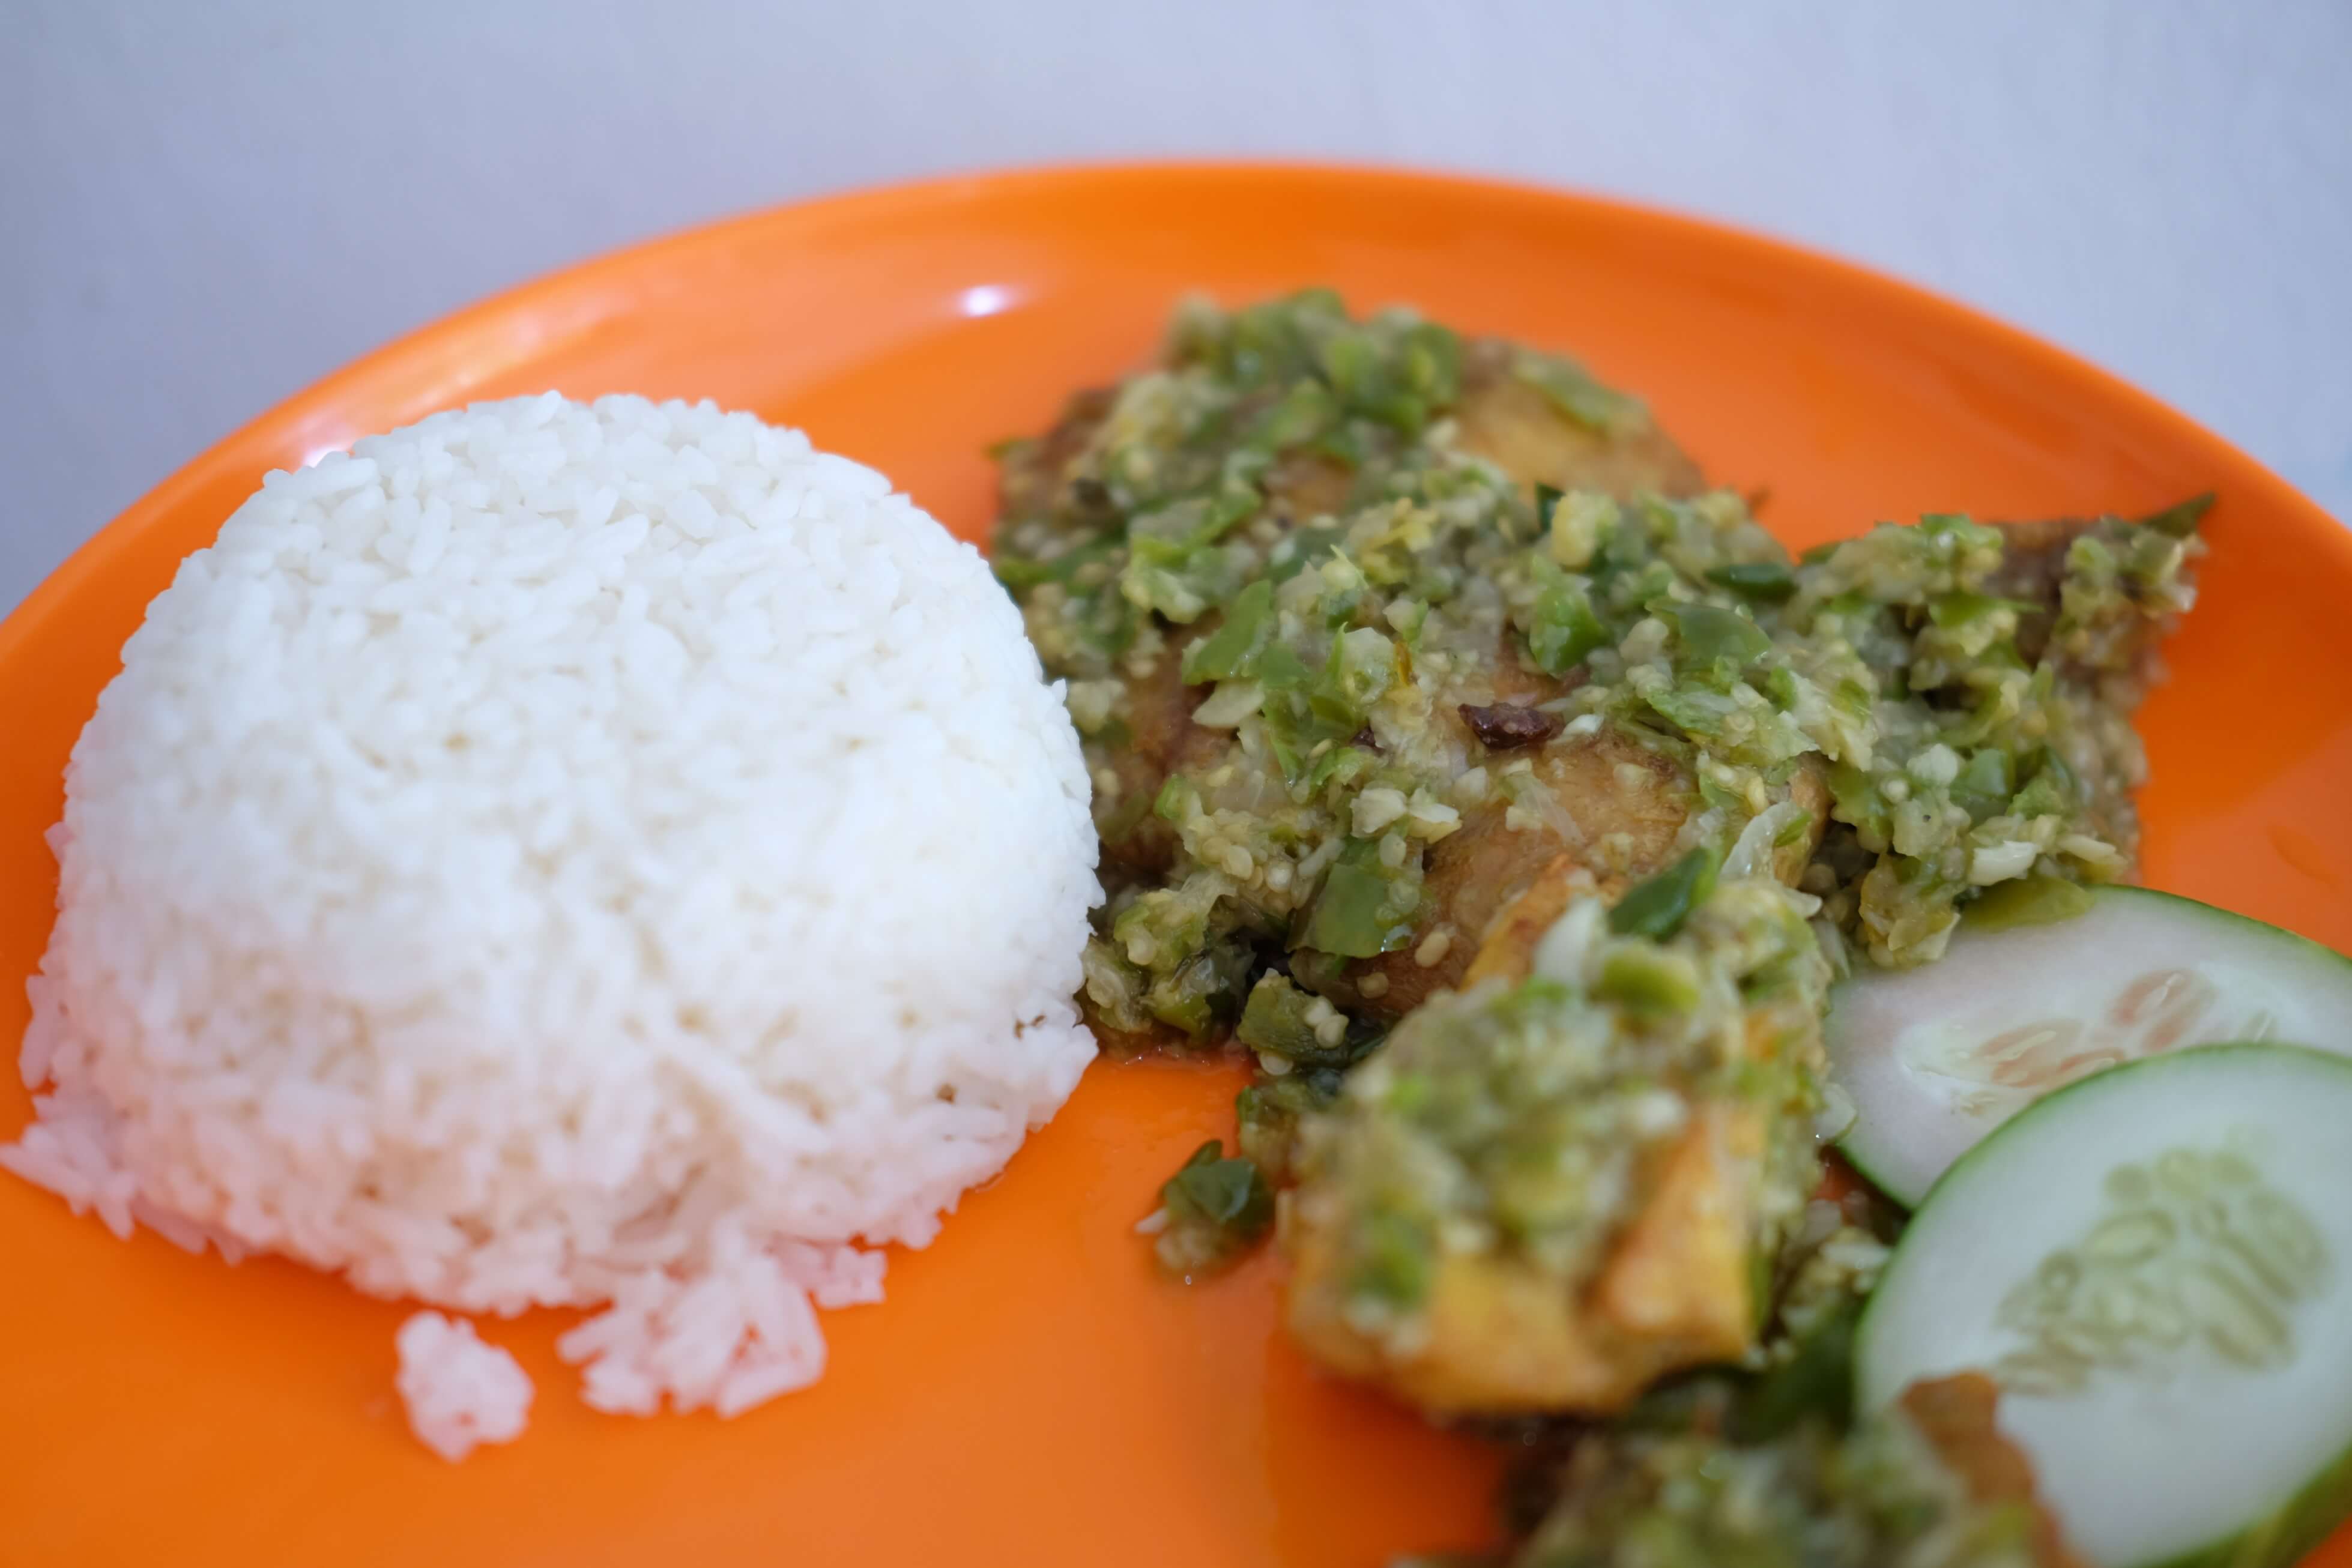 Chicken with Green Chili - Rp 20,000